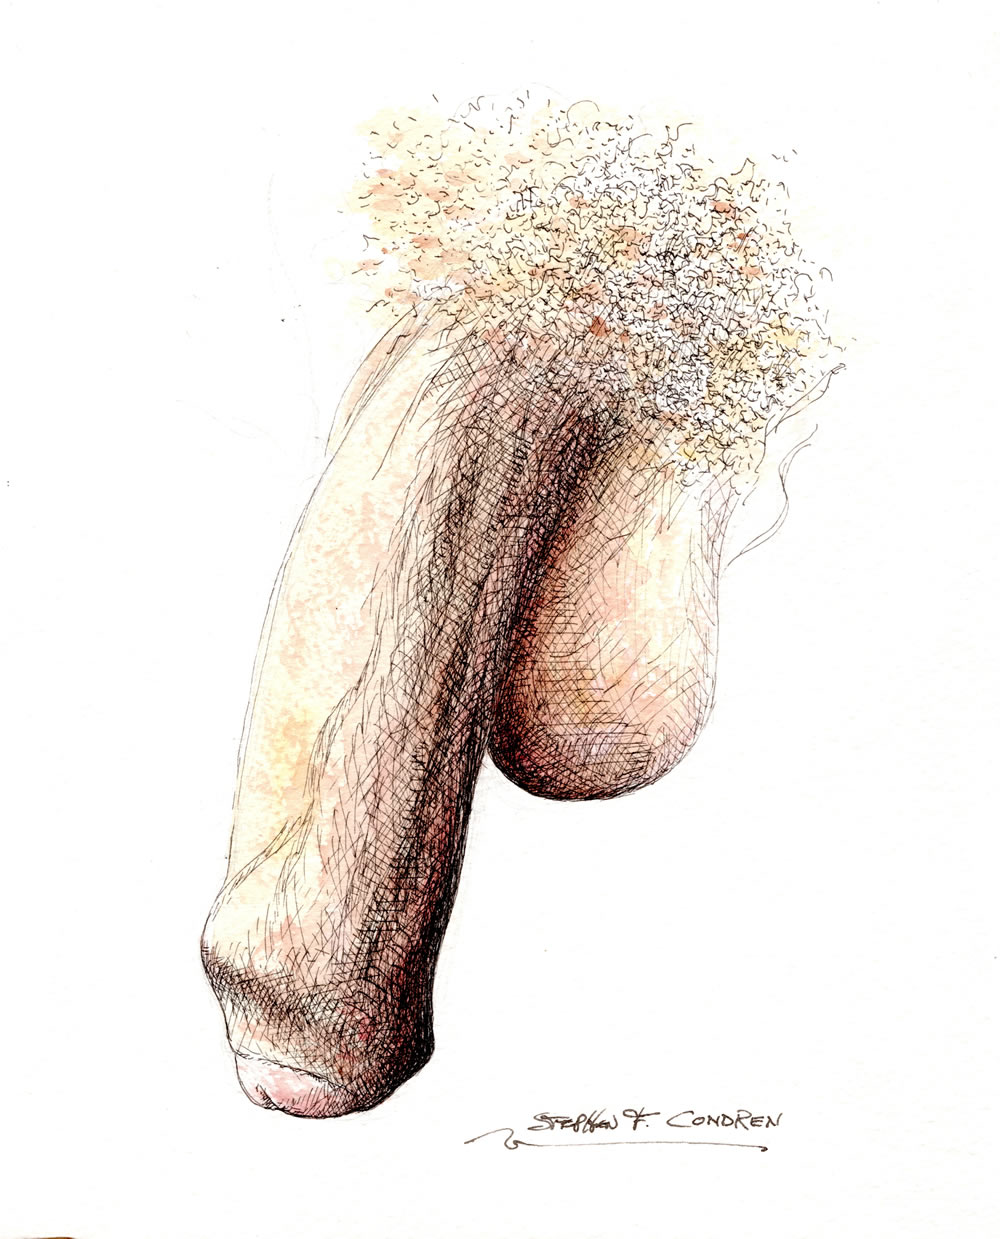 Pen & ink watercolor of a large uncut flaccid penis. The cock his very big with big hairy balls and thick veins on the shaft.